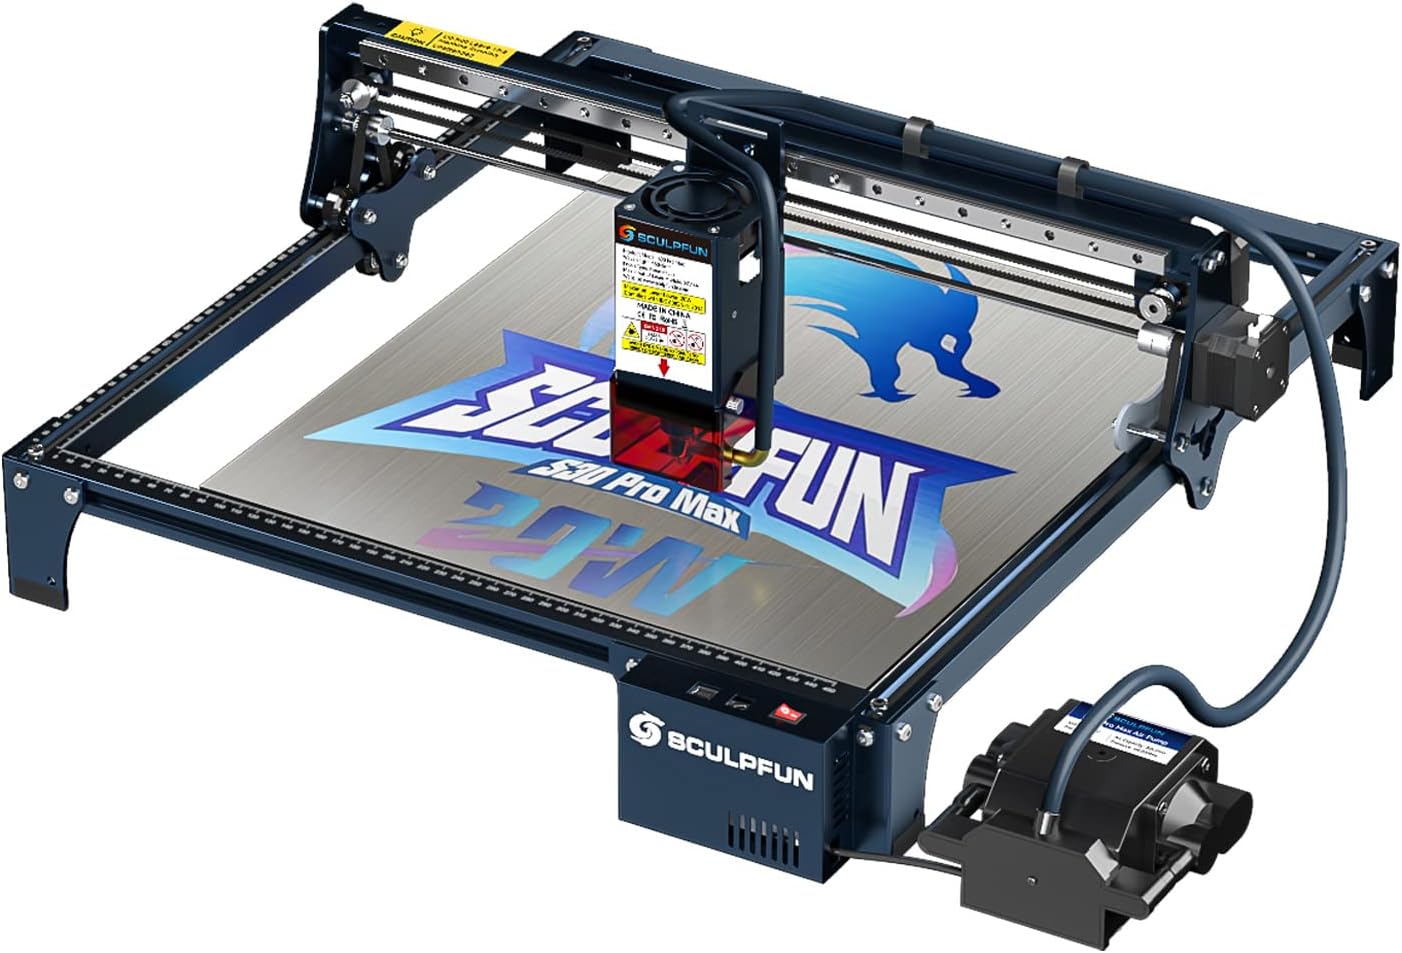 SCULPFUN S30 Pro Max Laser Engraver, 20W Optical Power with Automatic Full Air Assist Kit, Cut 10mm Plywood in One Pass, with Replaceable Lens Design and Limit Switch, Engraving Area Expandable